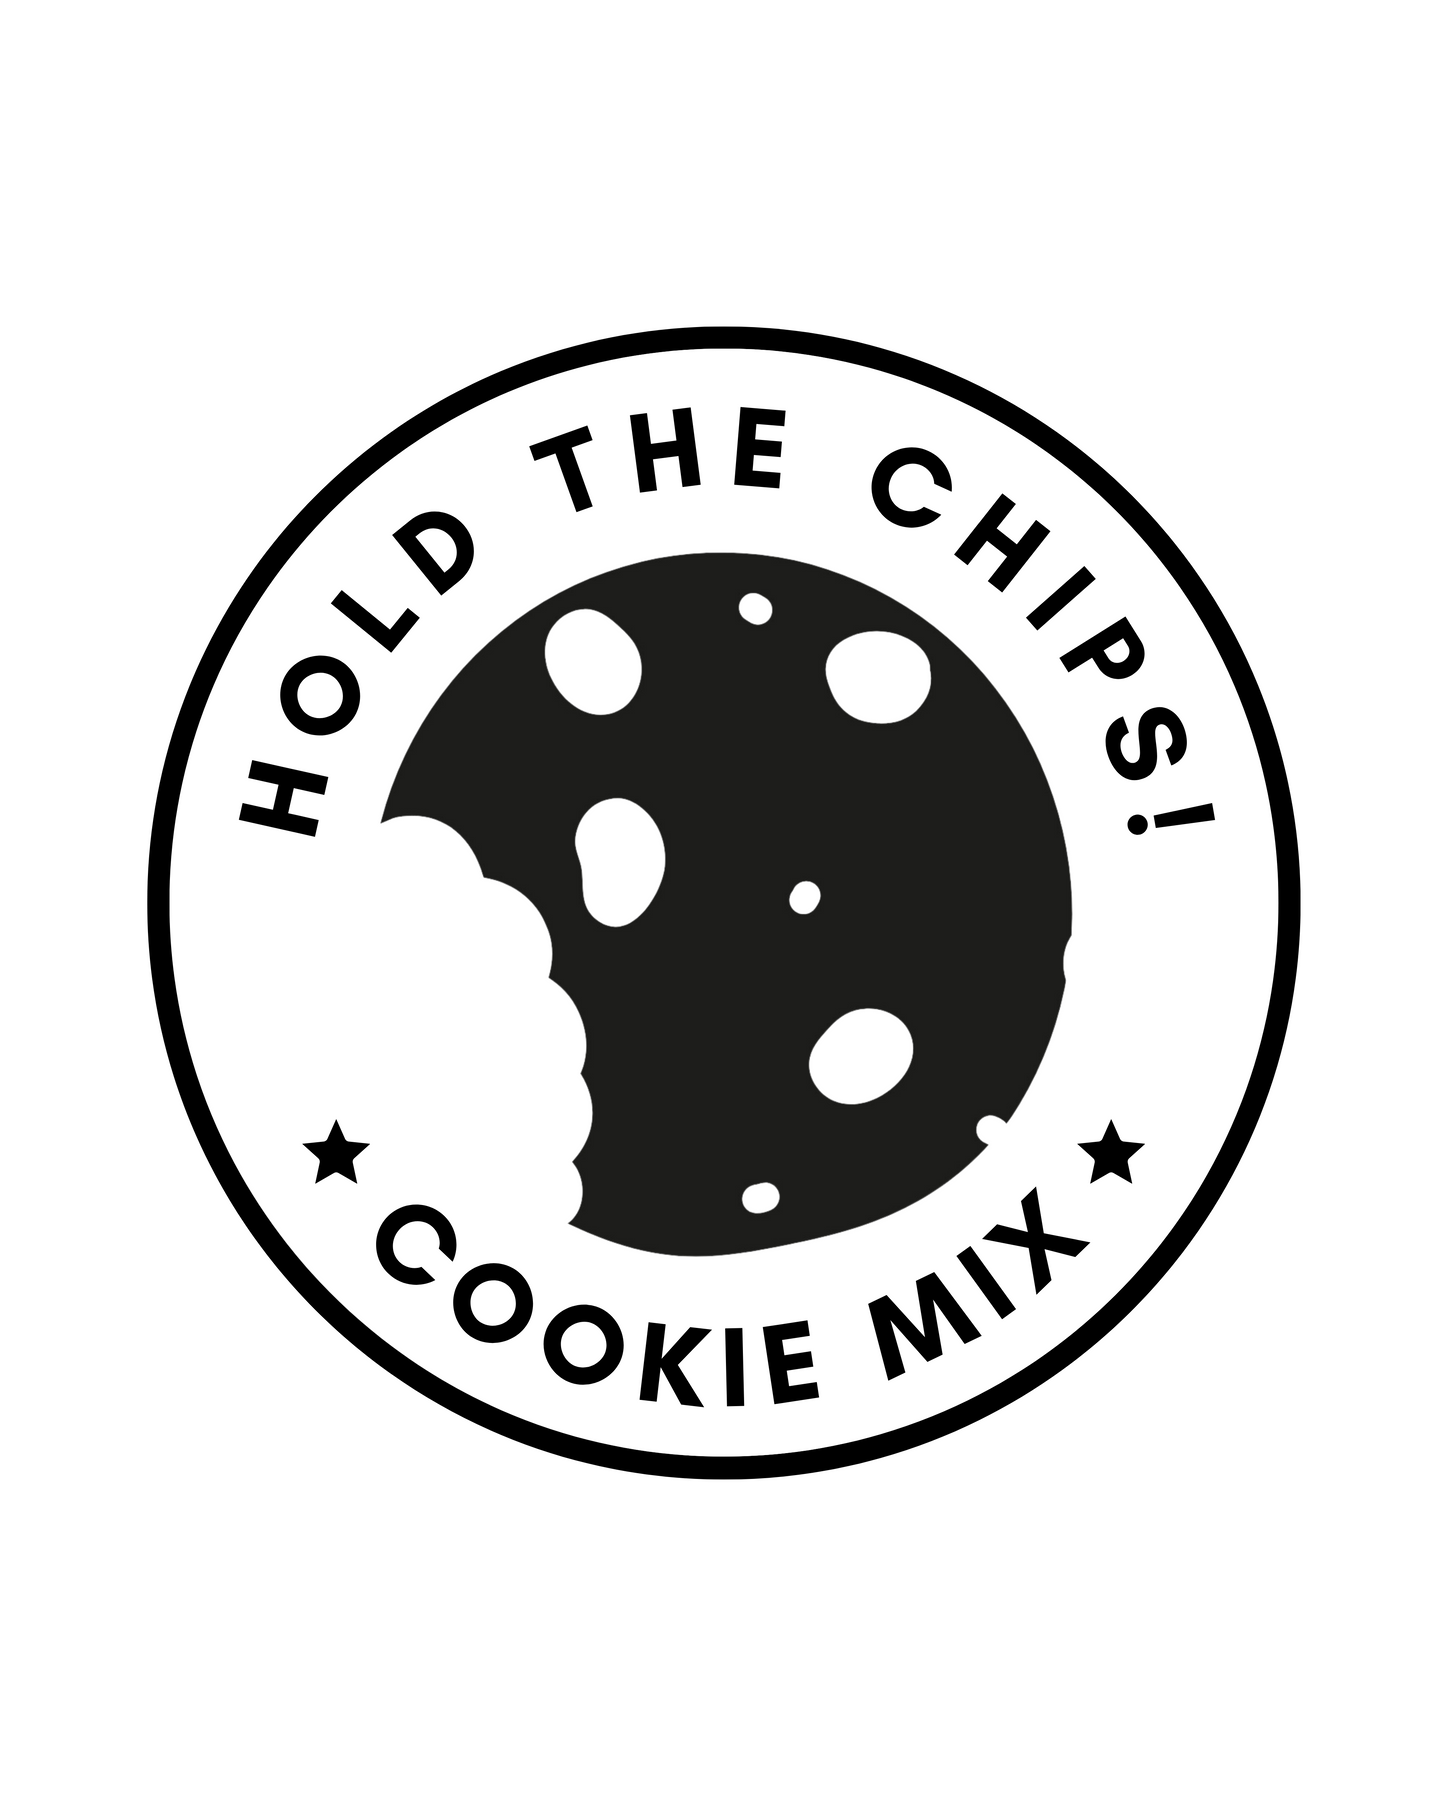 HOLD THE CHIPS! Cookie Mix (No Chips)